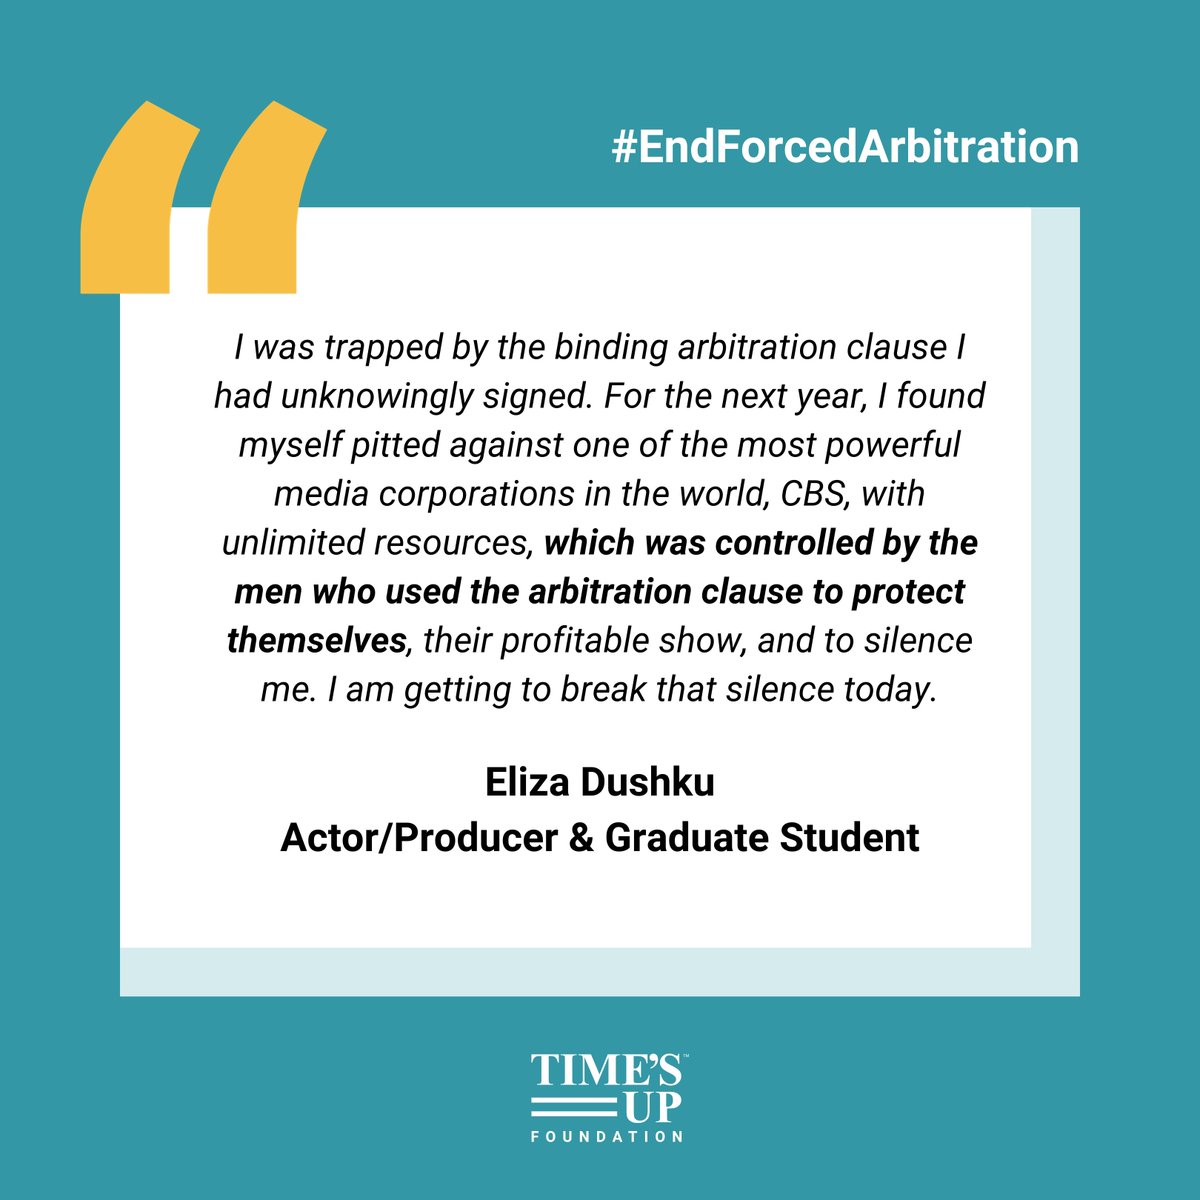 Ending forced arbitration of sexual assault claims will allow survivors to speak openly and will protect others in workplaces across the country. We stand with @ElizaDushku, Tatiana, Andowah, and Lora.

It is time to #EndForcedArbitration.